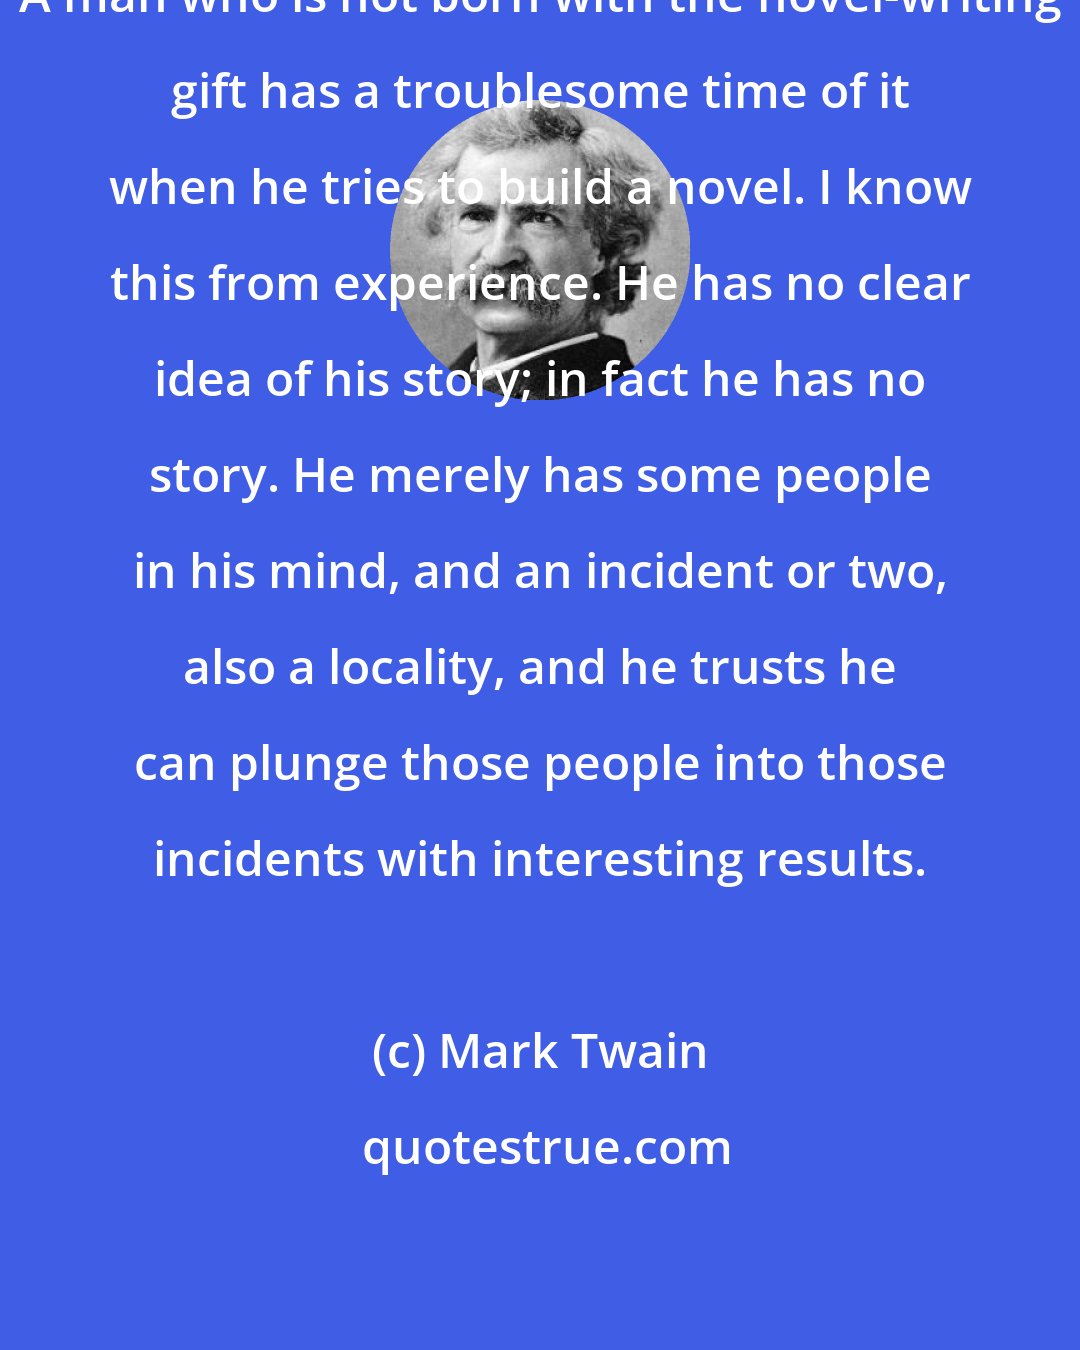 Mark Twain: A man who is not born with the novel-writing gift has a troublesome time of it when he tries to build a novel. I know this from experience. He has no clear idea of his story; in fact he has no story. He merely has some people in his mind, and an incident or two, also a locality, and he trusts he can plunge those people into those incidents with interesting results.